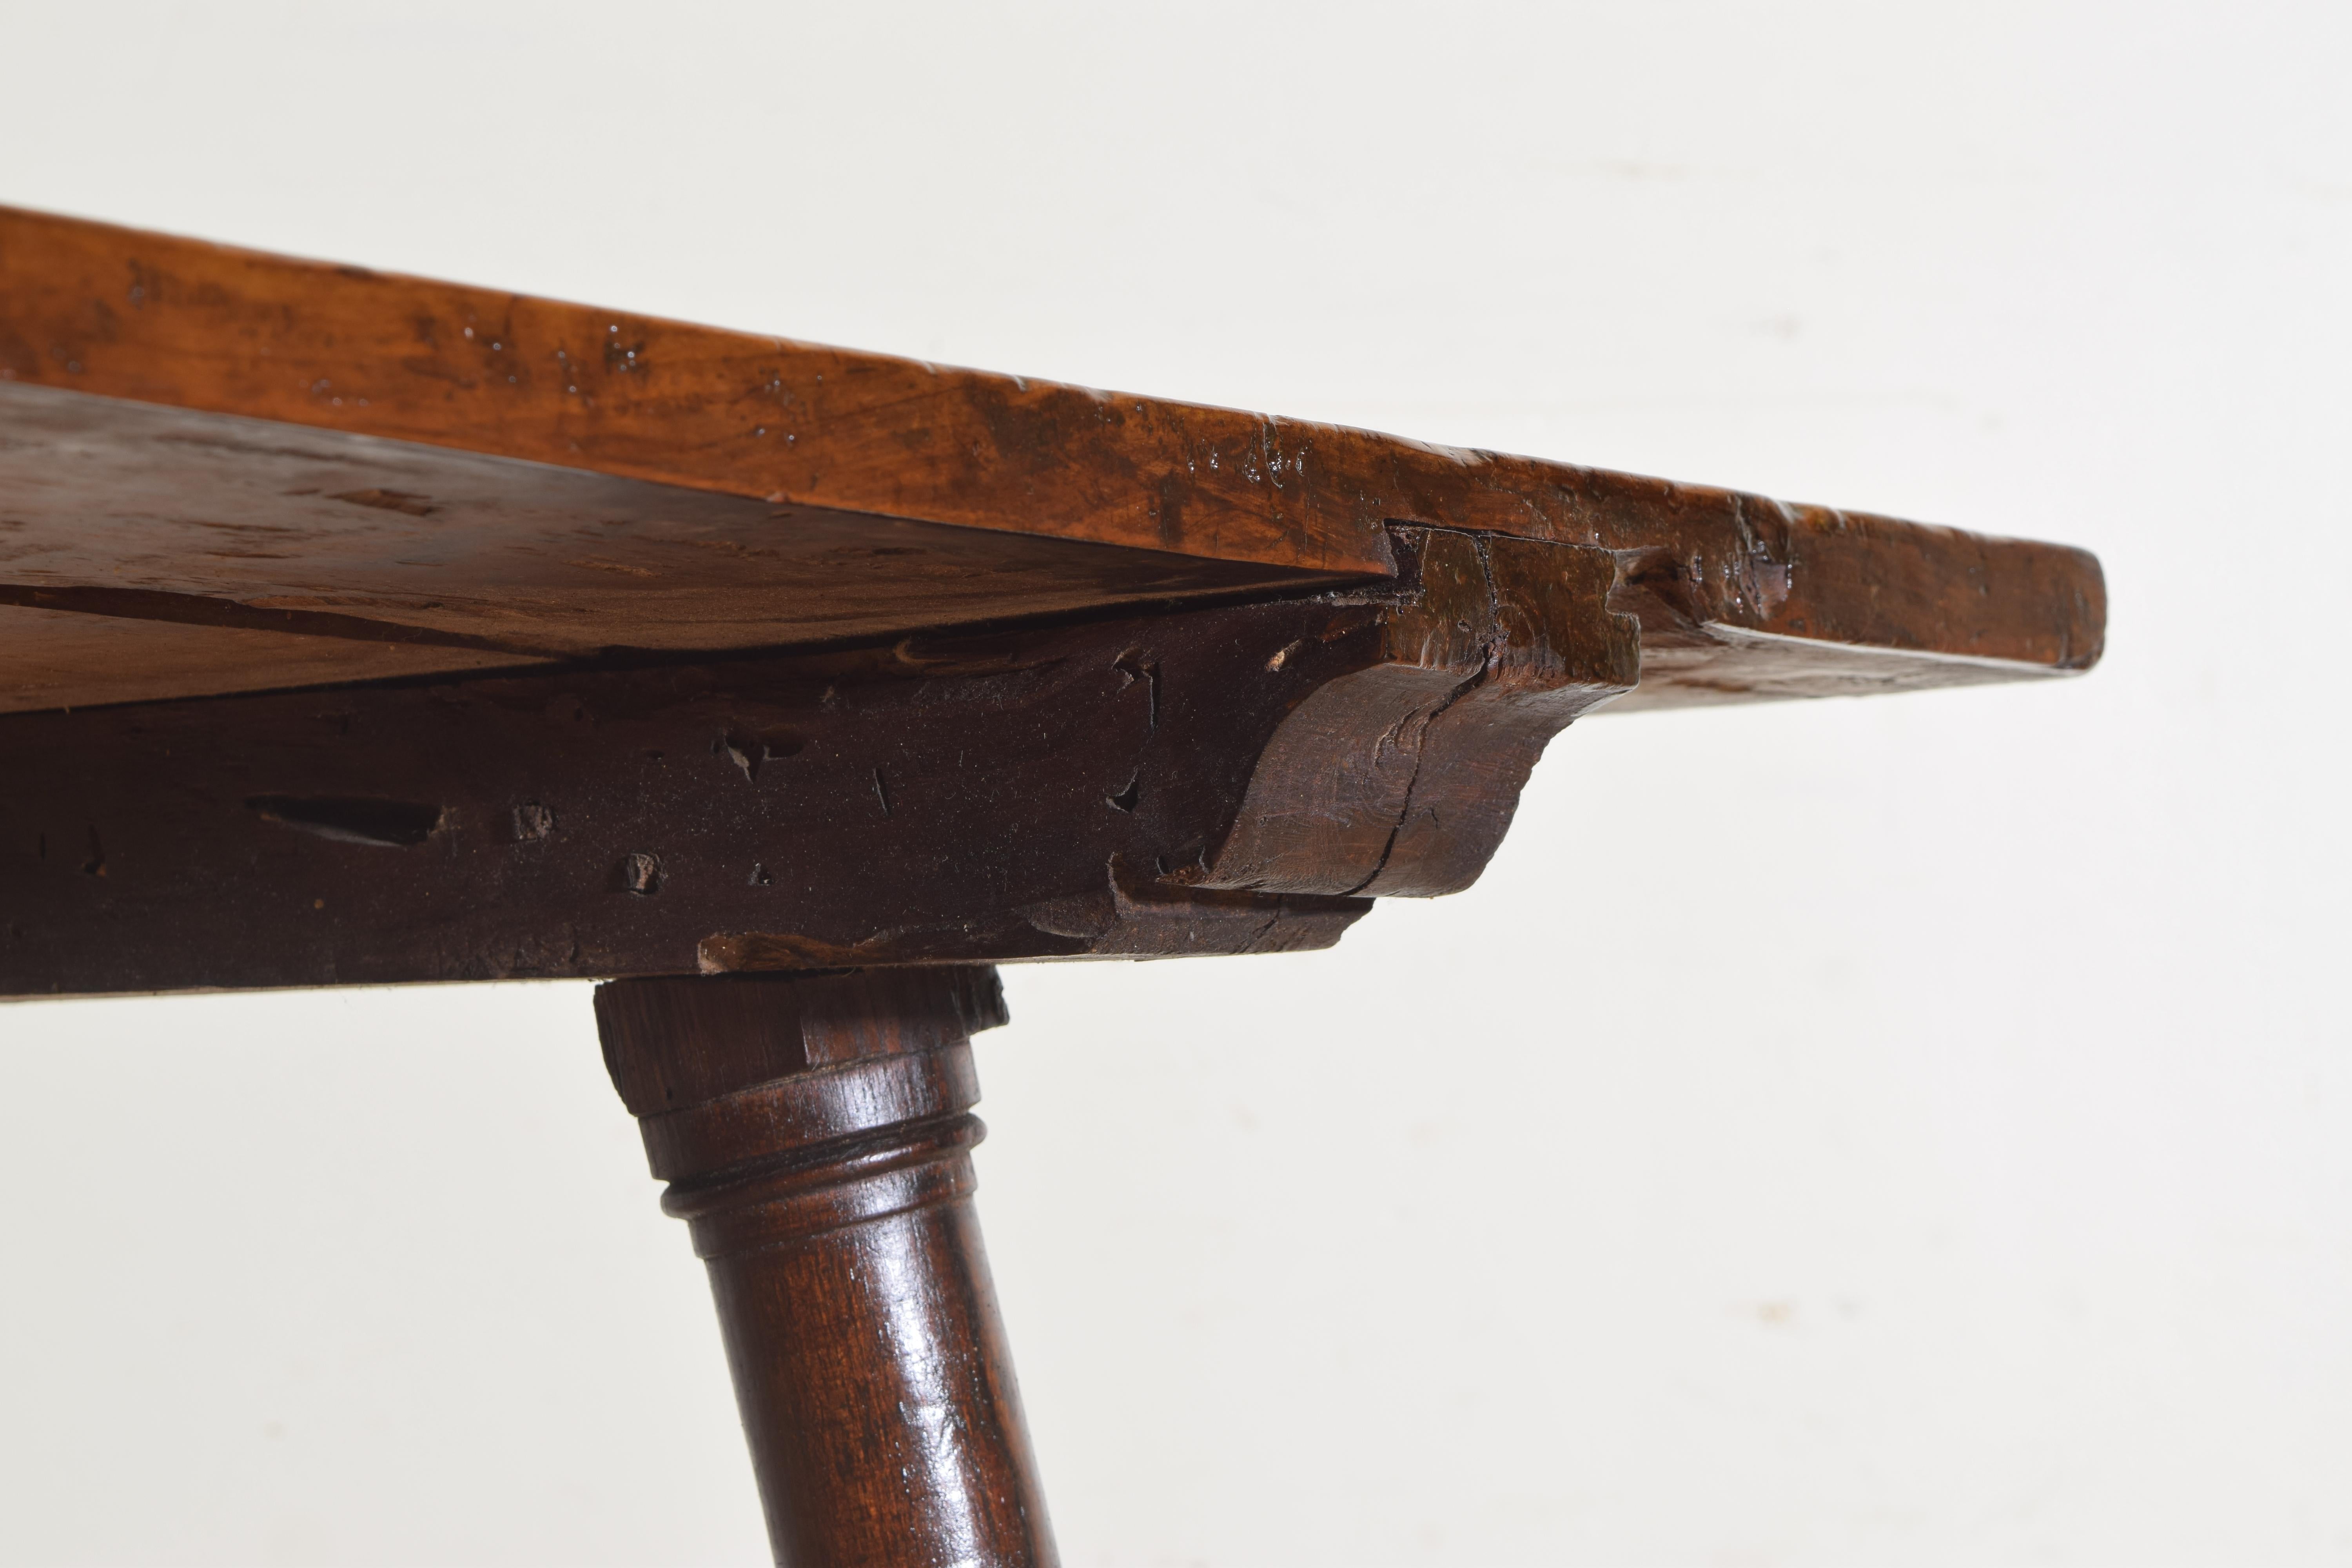 Early 18th Century Spanish Late Baroque Olivewood & Walnut Dining or Writing Table, ca. 1700